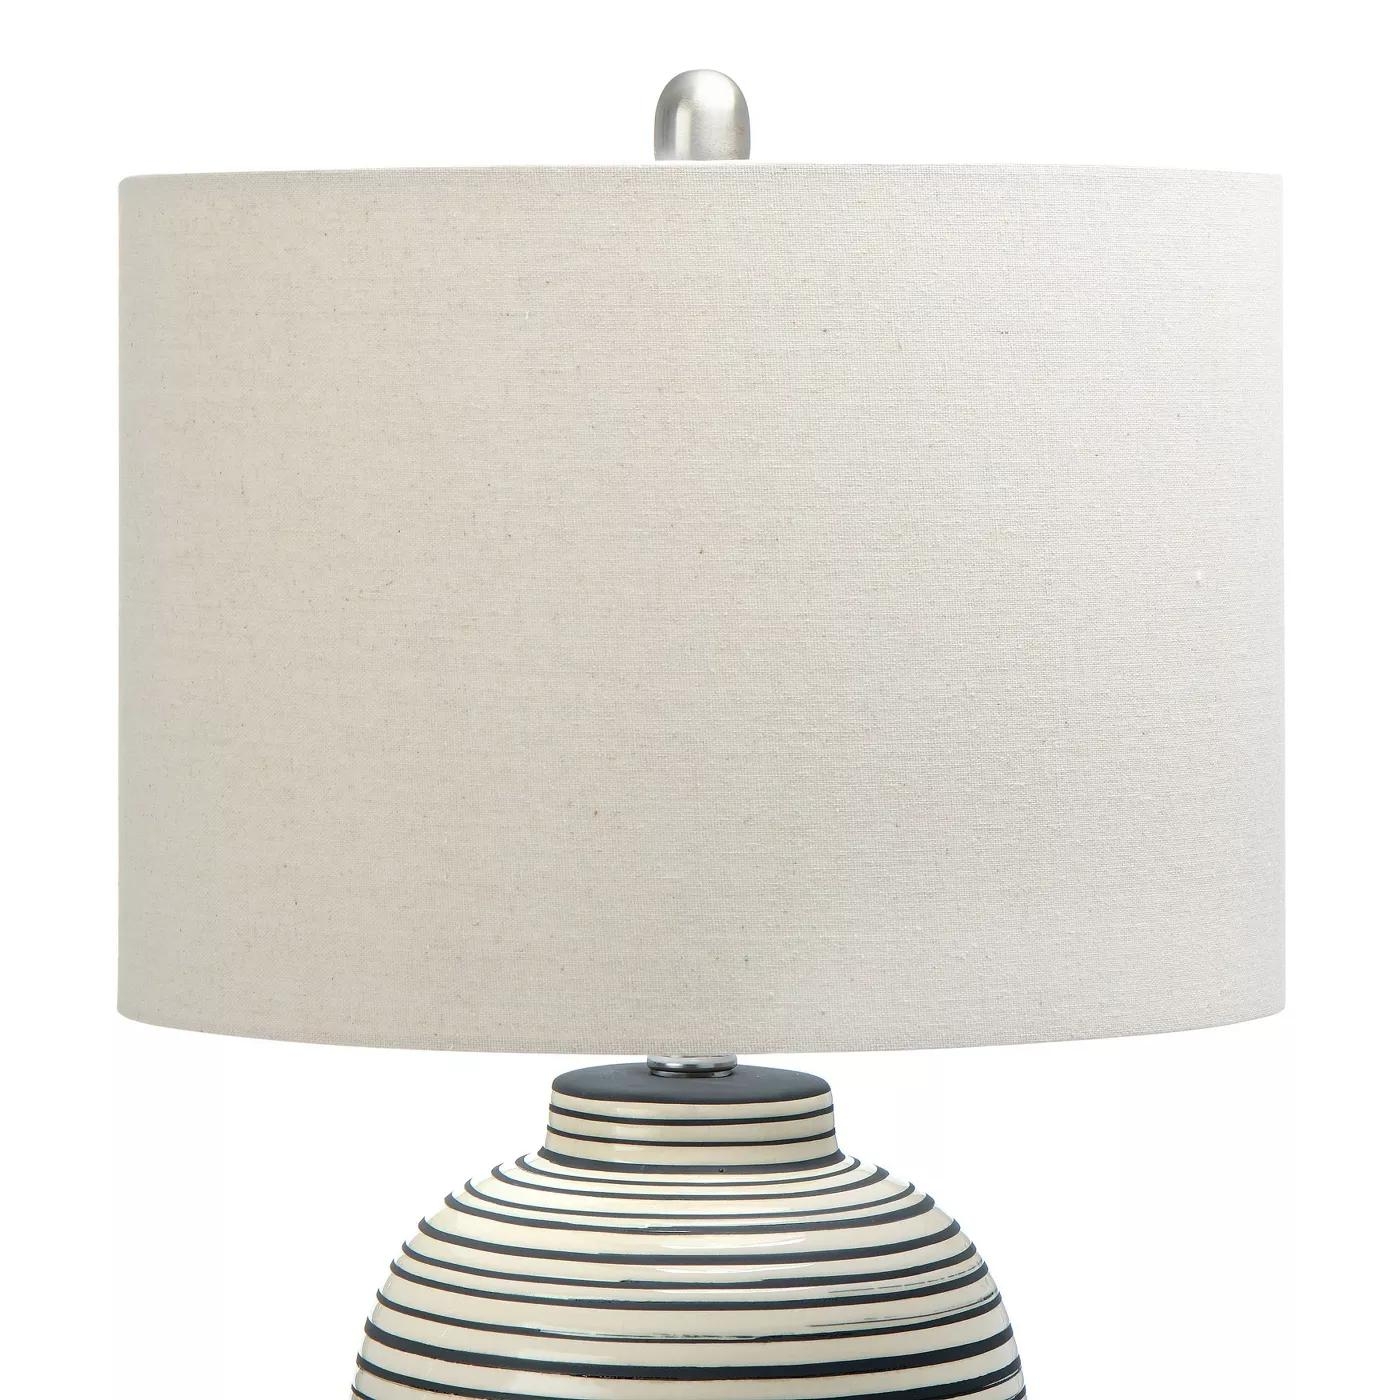 23" Ceramic Textured Striped Table Lamp - Image 1